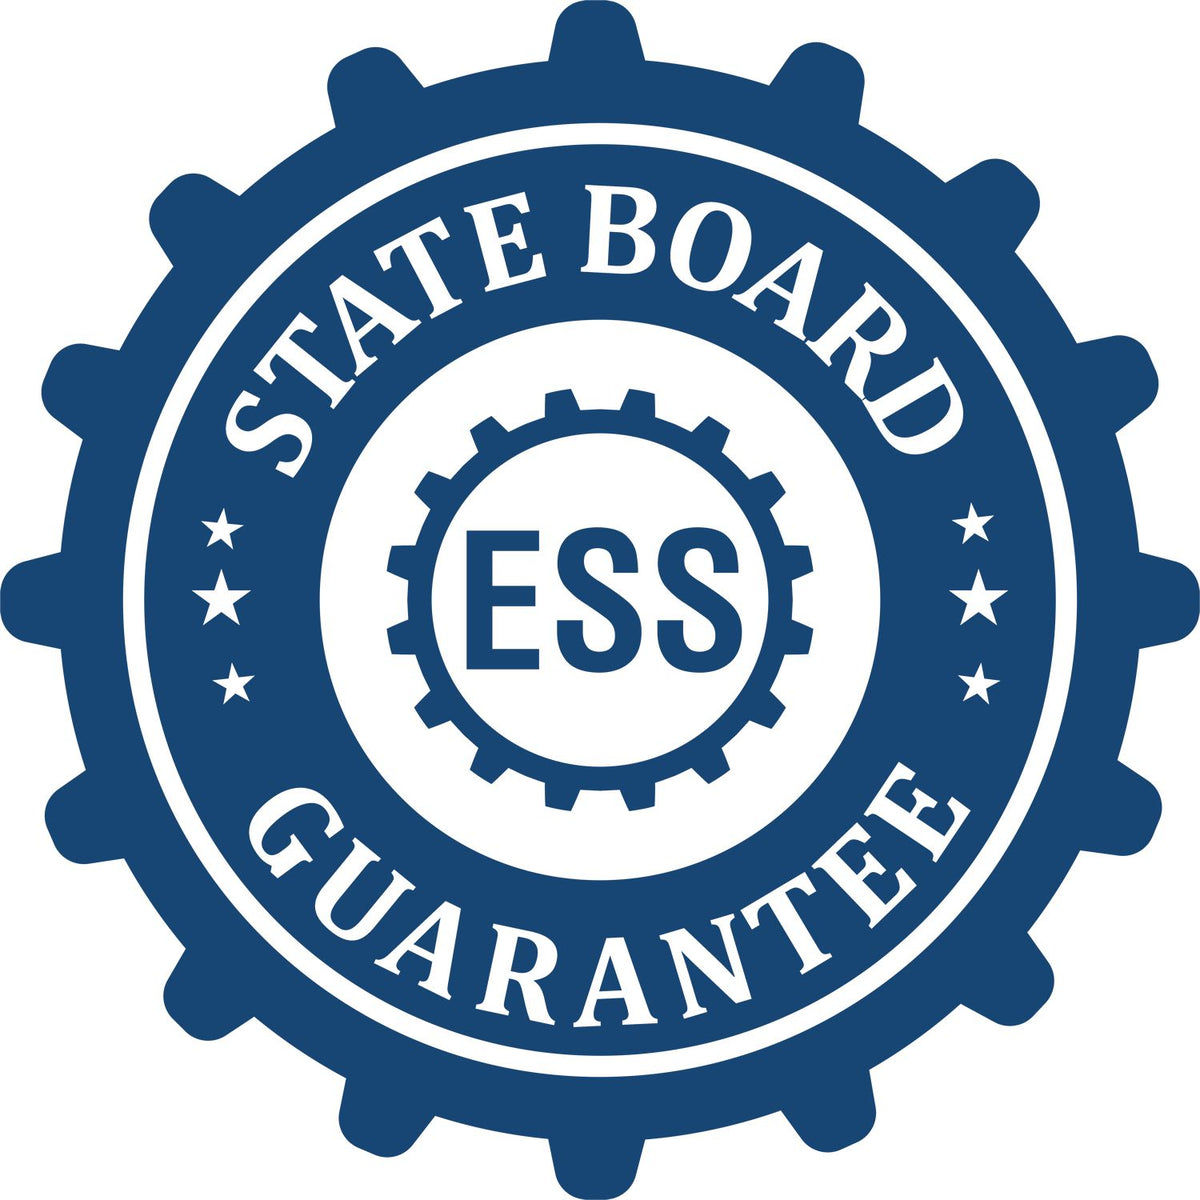 An emblem in a gear shape illustrating a state board guarantee for the Digital Colorado PE Stamp and Electronic Seal for Colorado Engineer product.